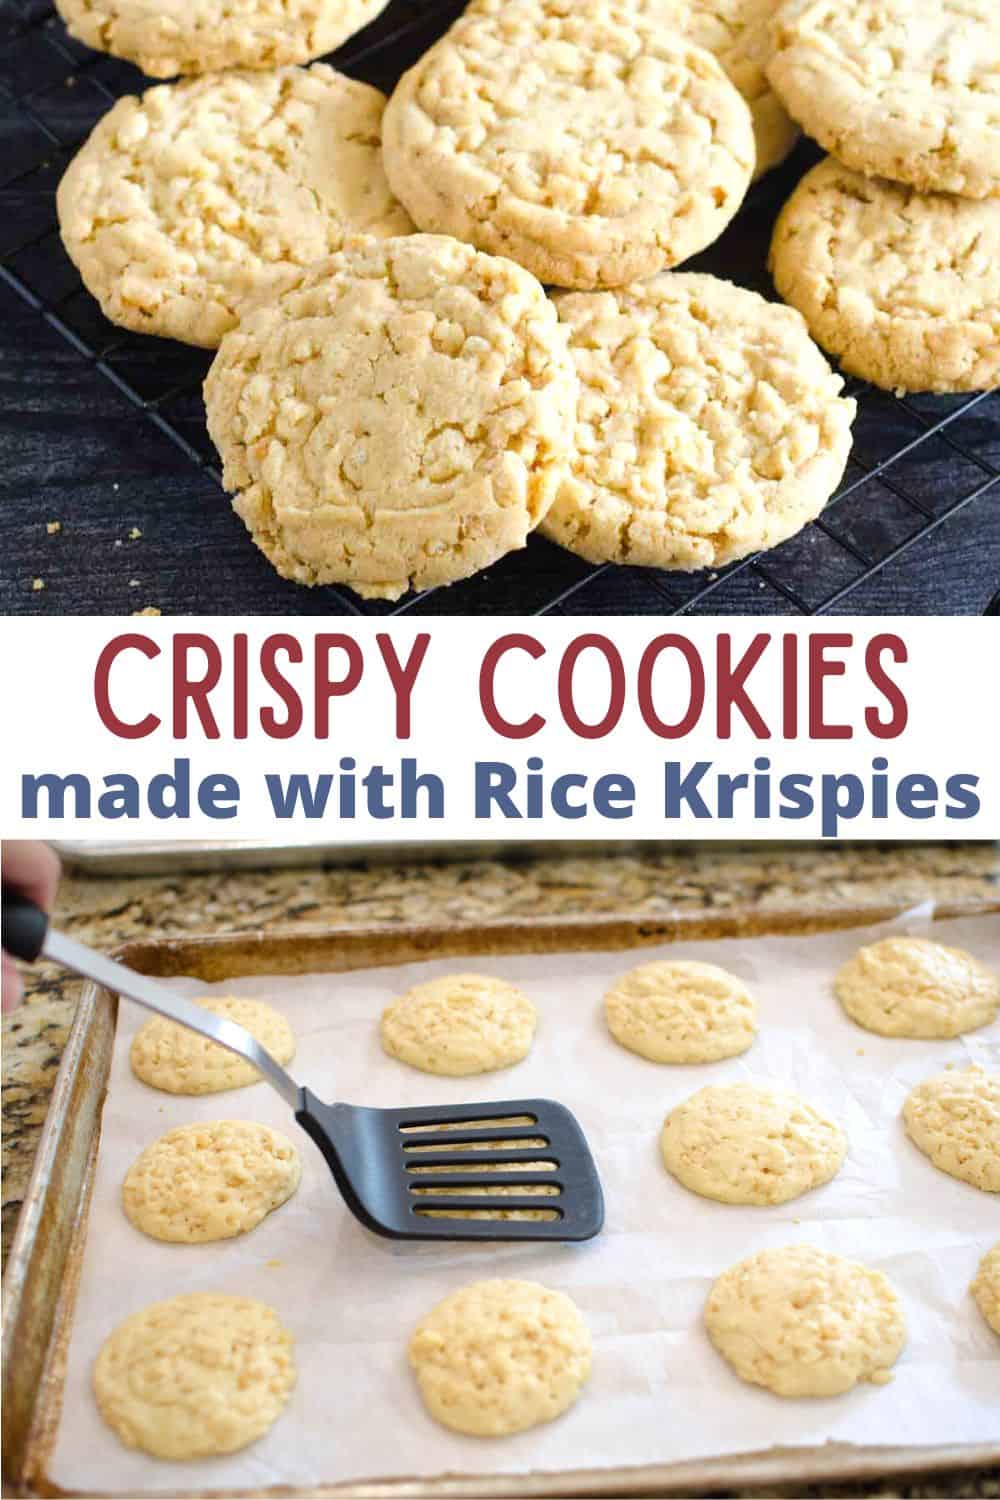 If you love cookies with a crunch, you will LOVE these Rice Krispie cookies! No need for marshmallows in this rice krispie treat. These cookies are so easy you'll make them over and over again!